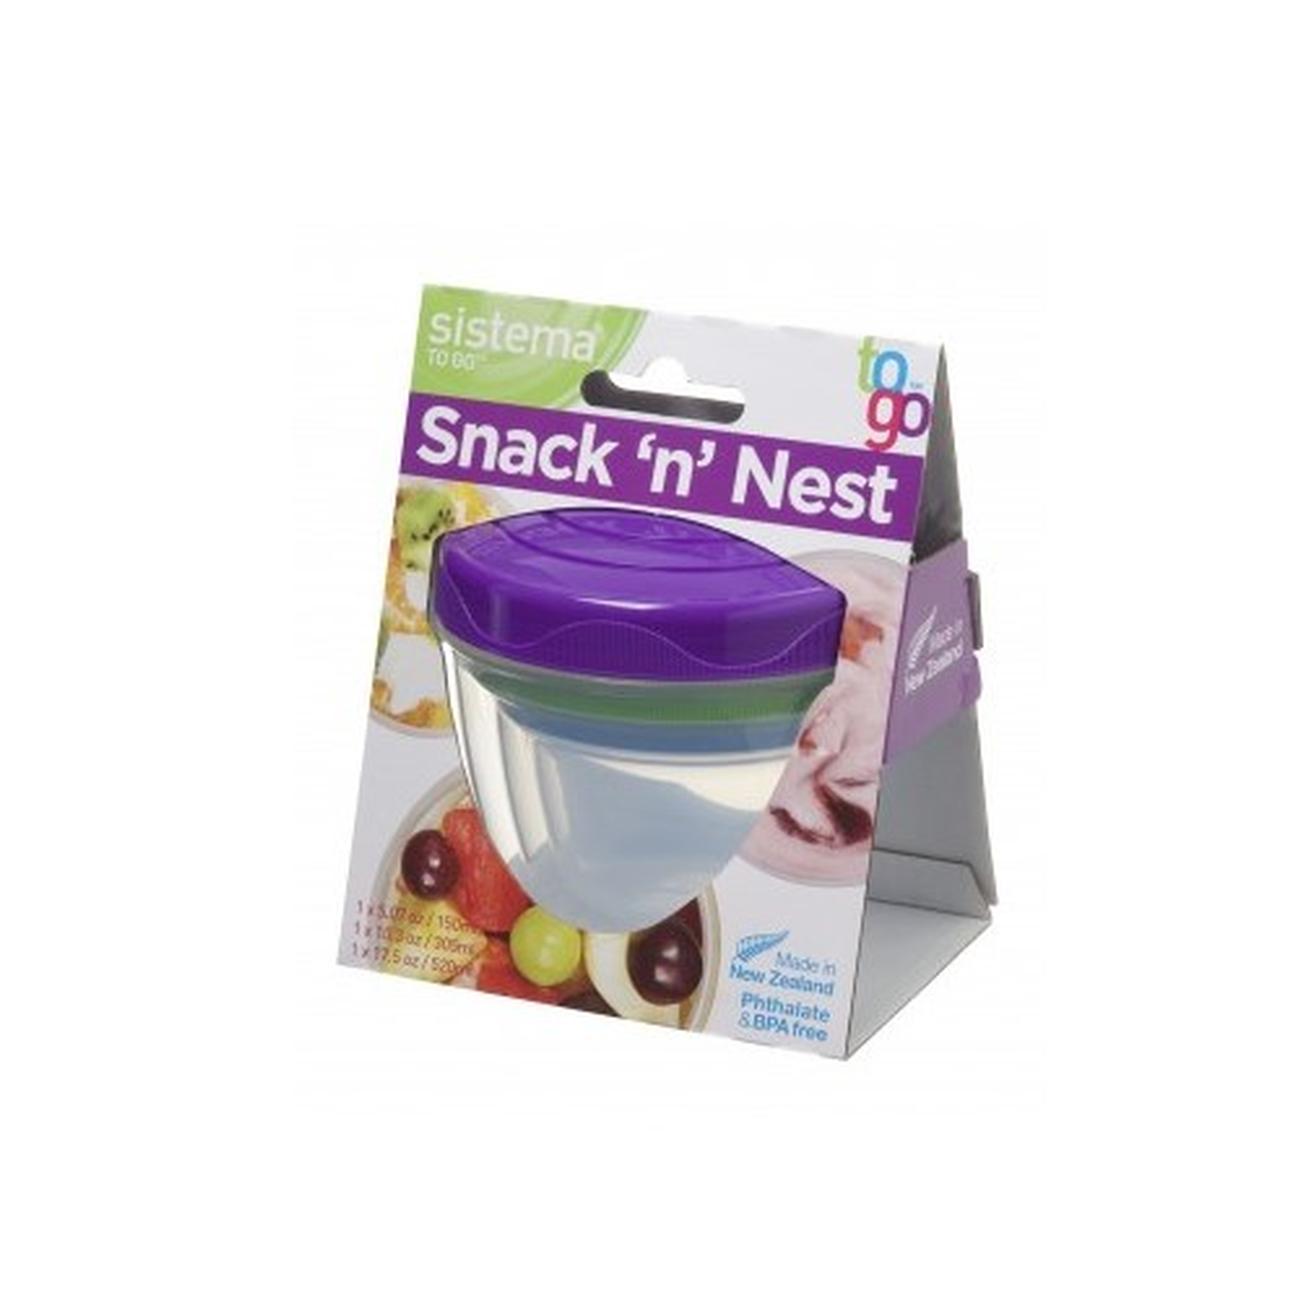 https://www.thekitchenwhisk.ie/contentfiles/productImages/Large/21483_Snack_n_Nest_Purple.jpg